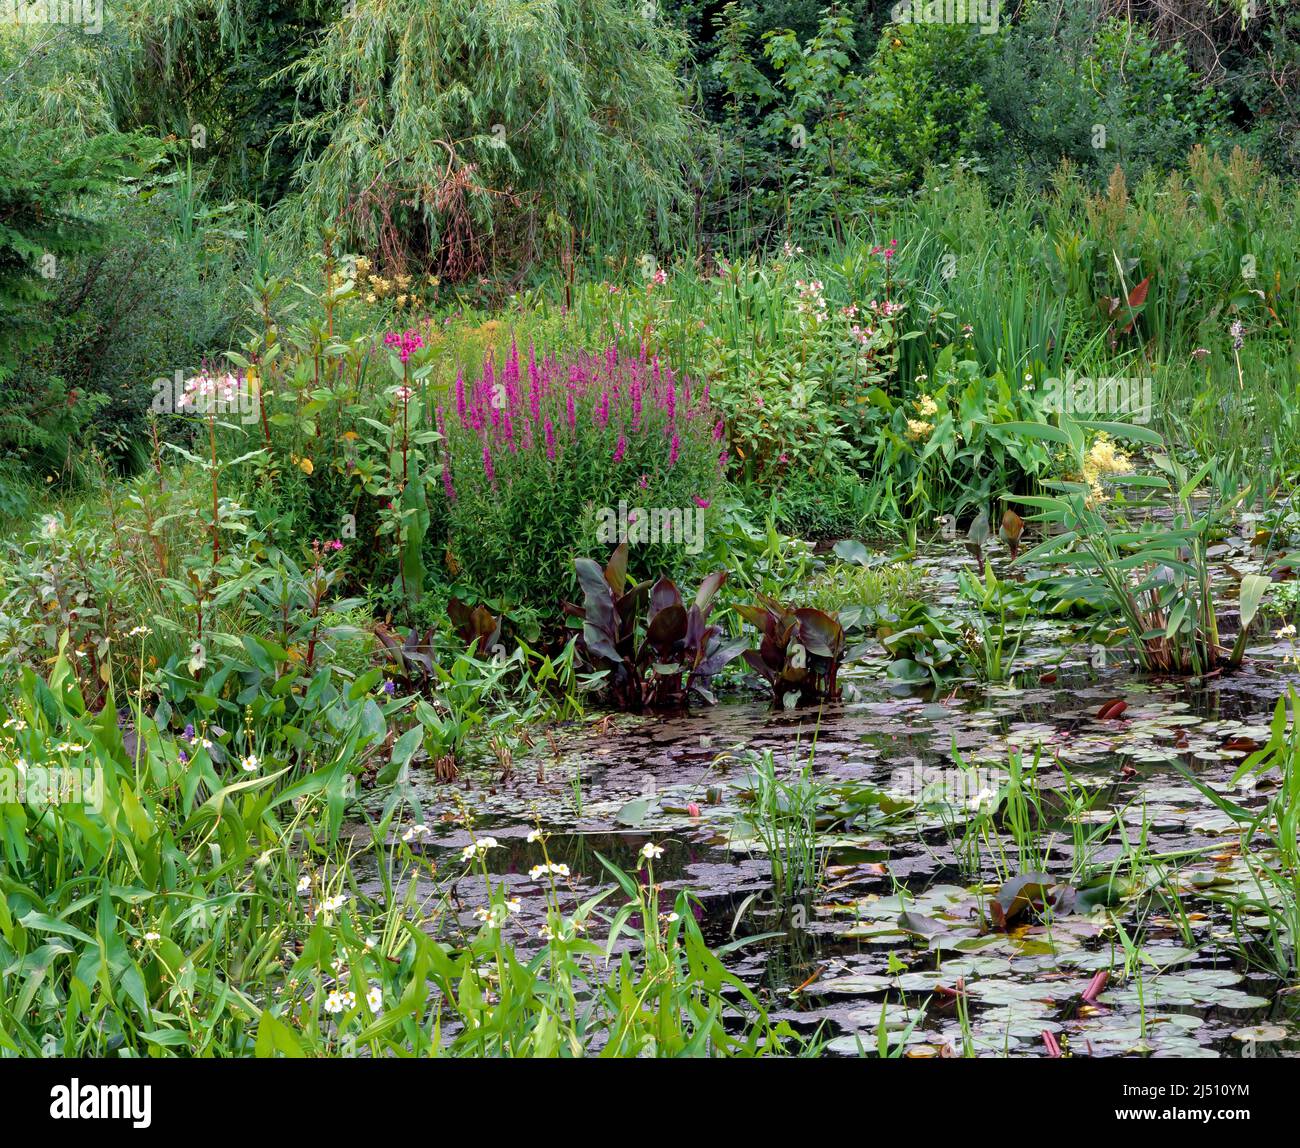 A small valuable biotope. Water lily pond with various aquatic plants in summer Stock Photo